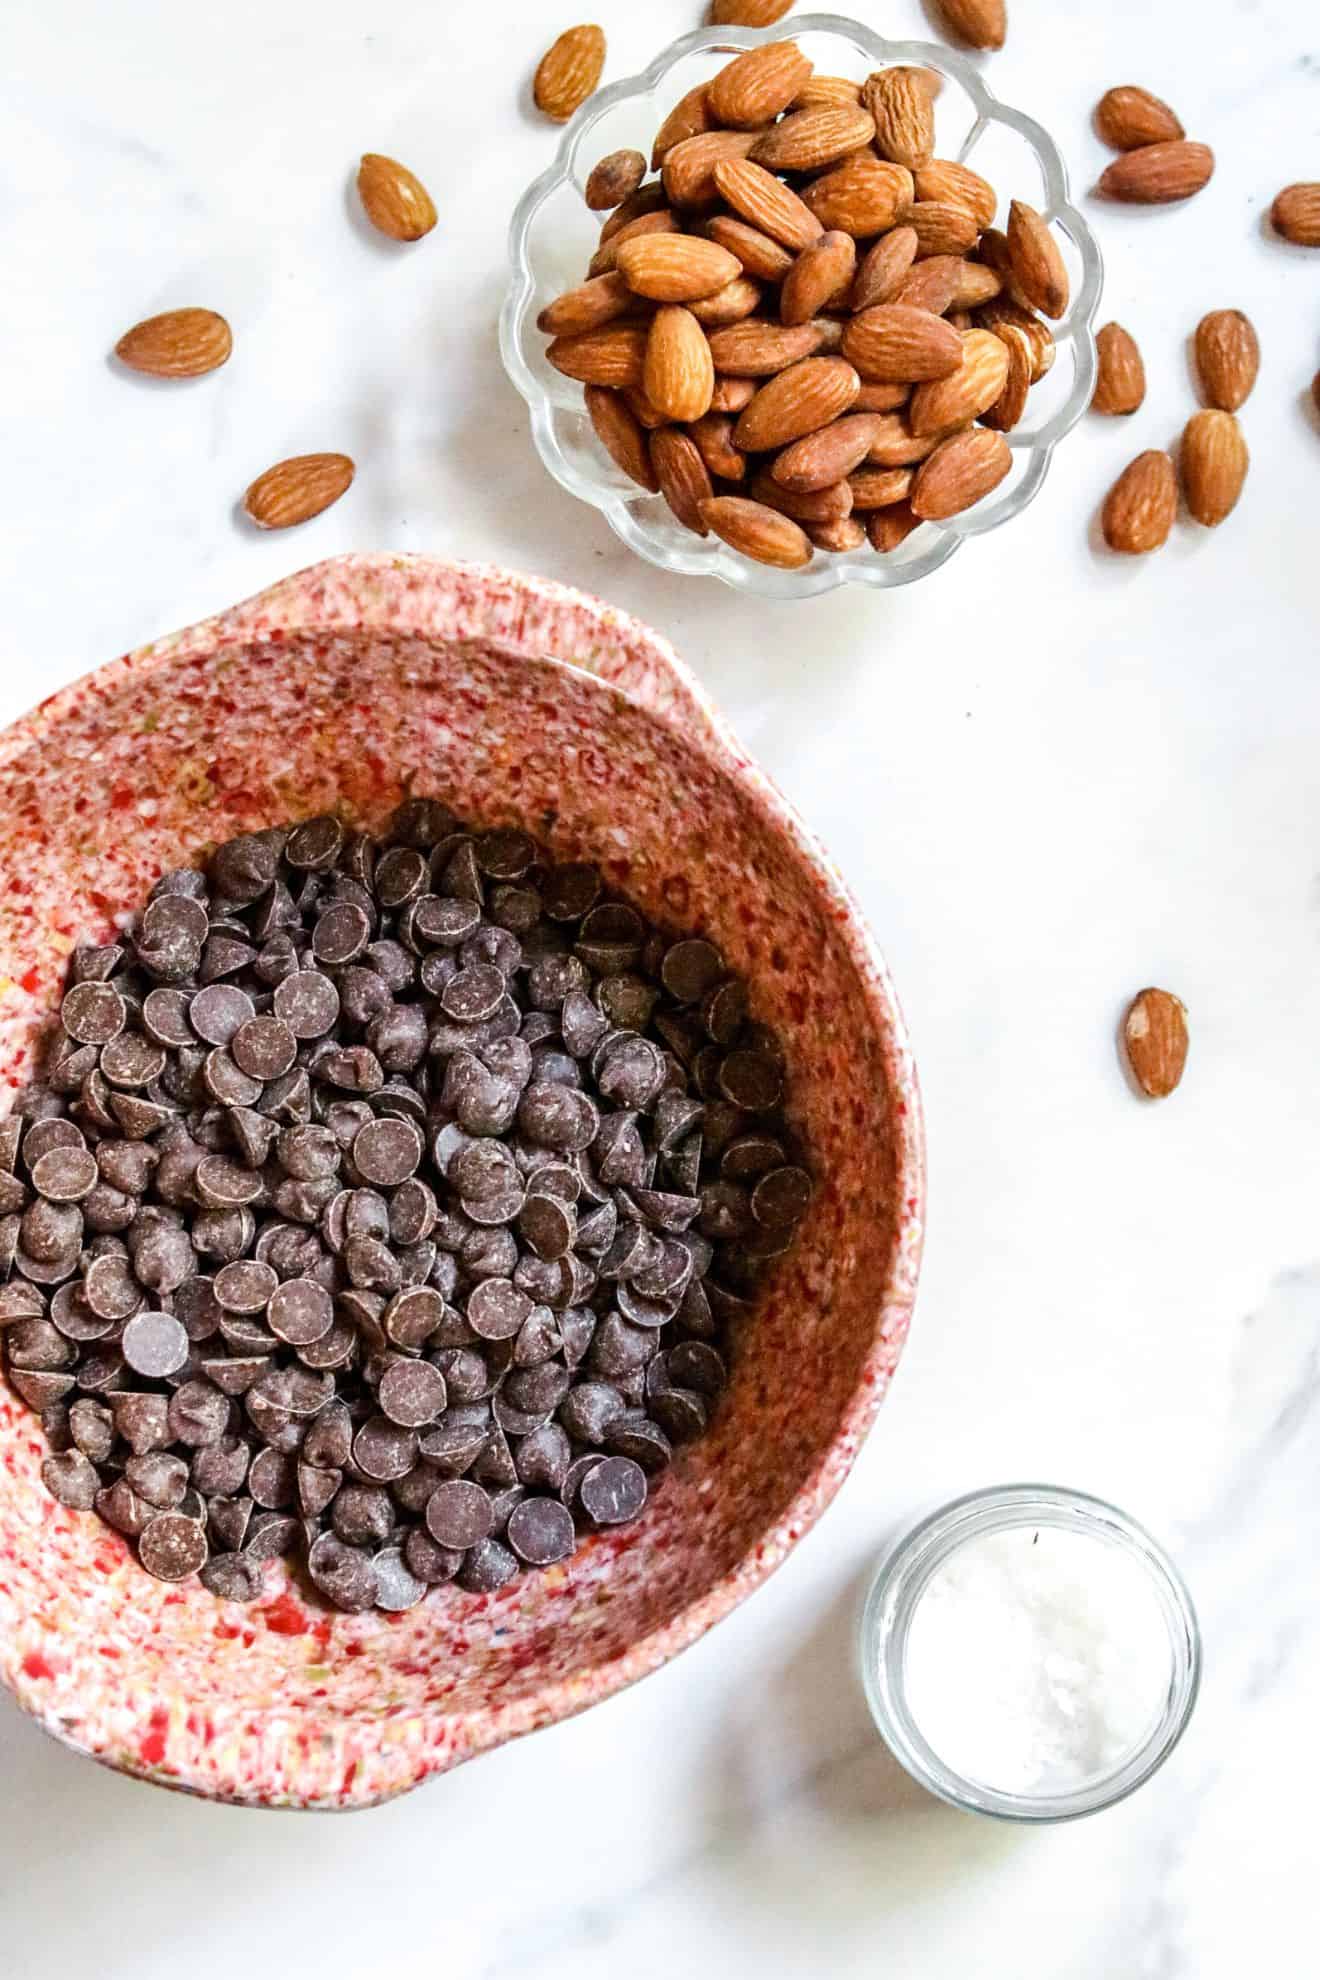 This is an overhead image of a small glass bowl with almonds, a larger pink speckled bowl with chocolate chips and a small glass jar with flakey salt. All the items sit on a marble countertop.